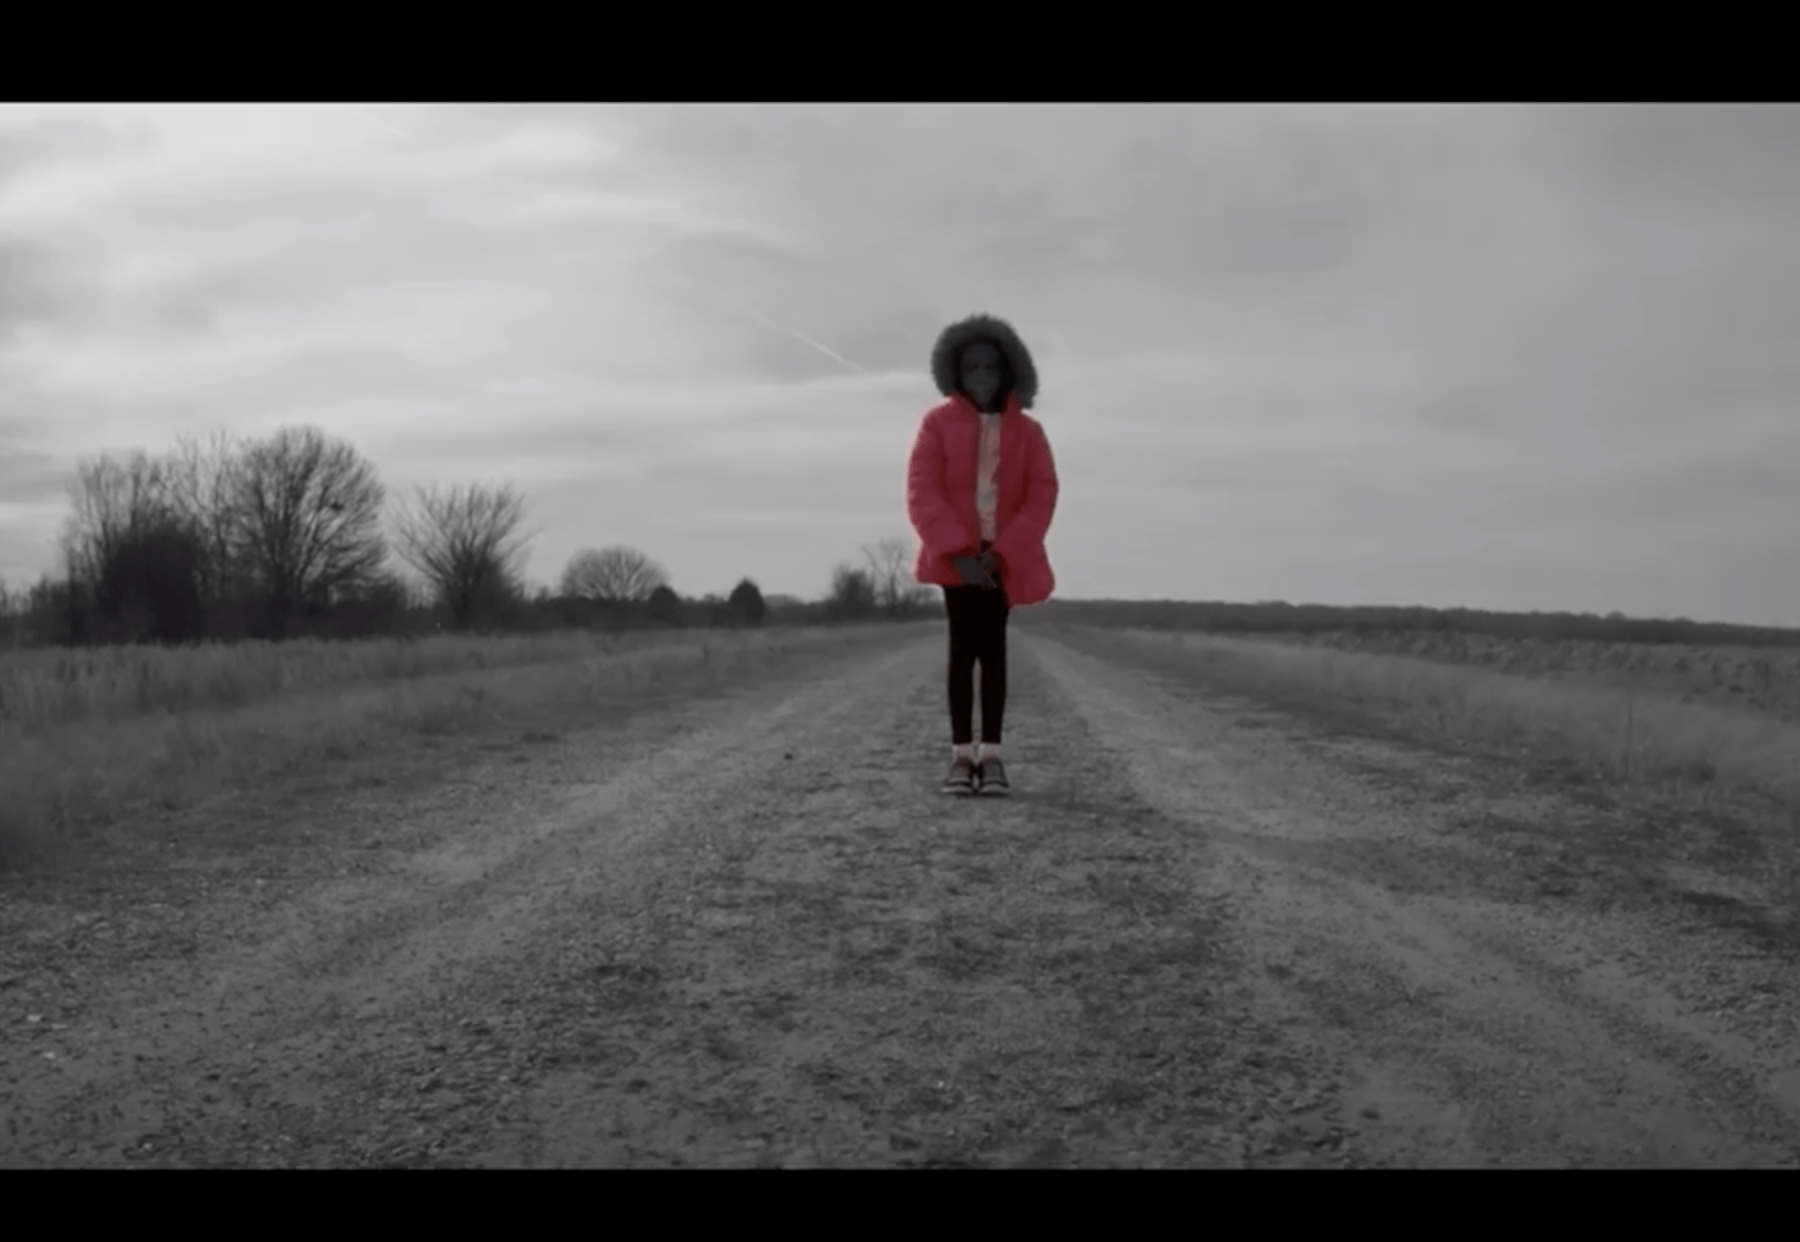 A African-American girl standing in the middle of a dirt road